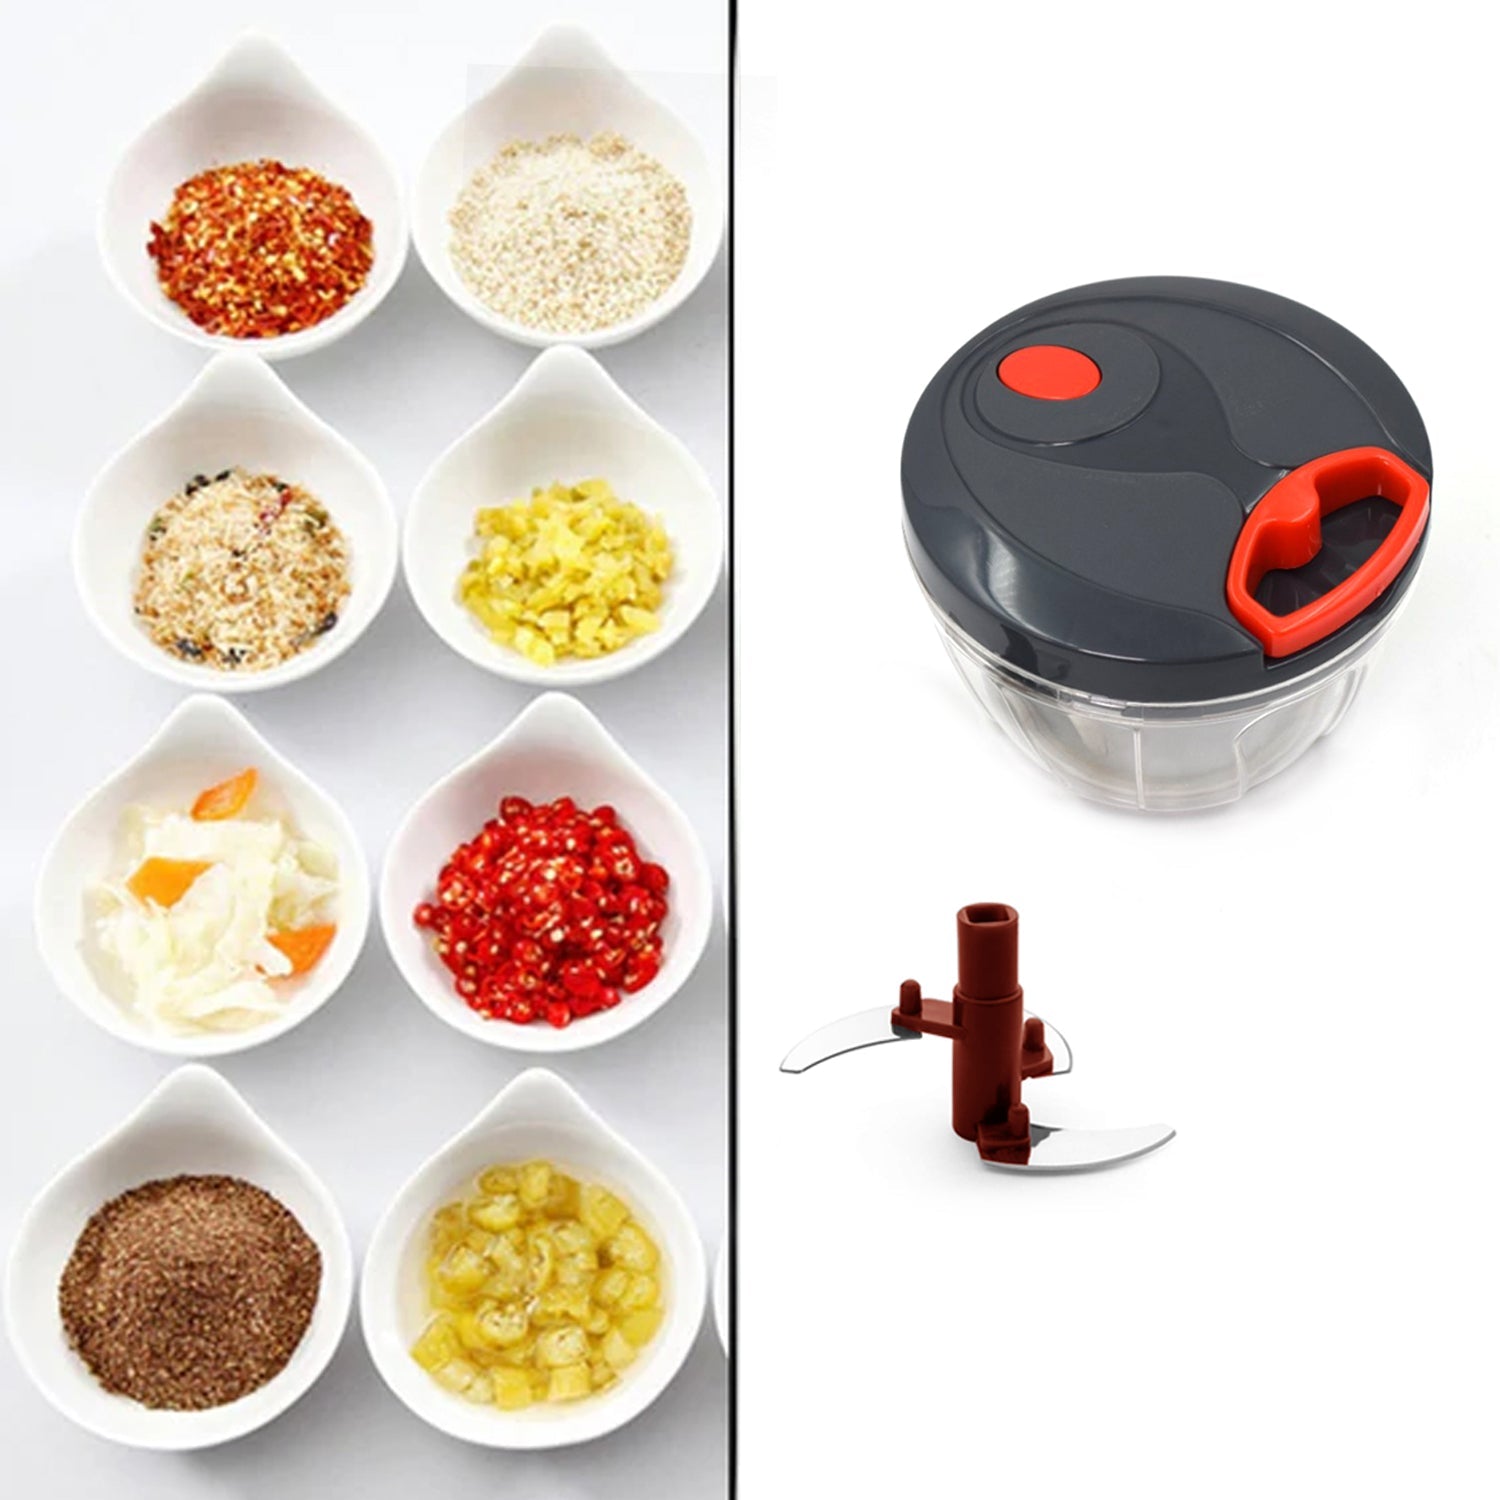 0080 A Atm Chopper 450 ML used for chopping and cutting of various fruits and vegetables in all kinds f household kitchen purposes and all. freeshipping - DeoDap